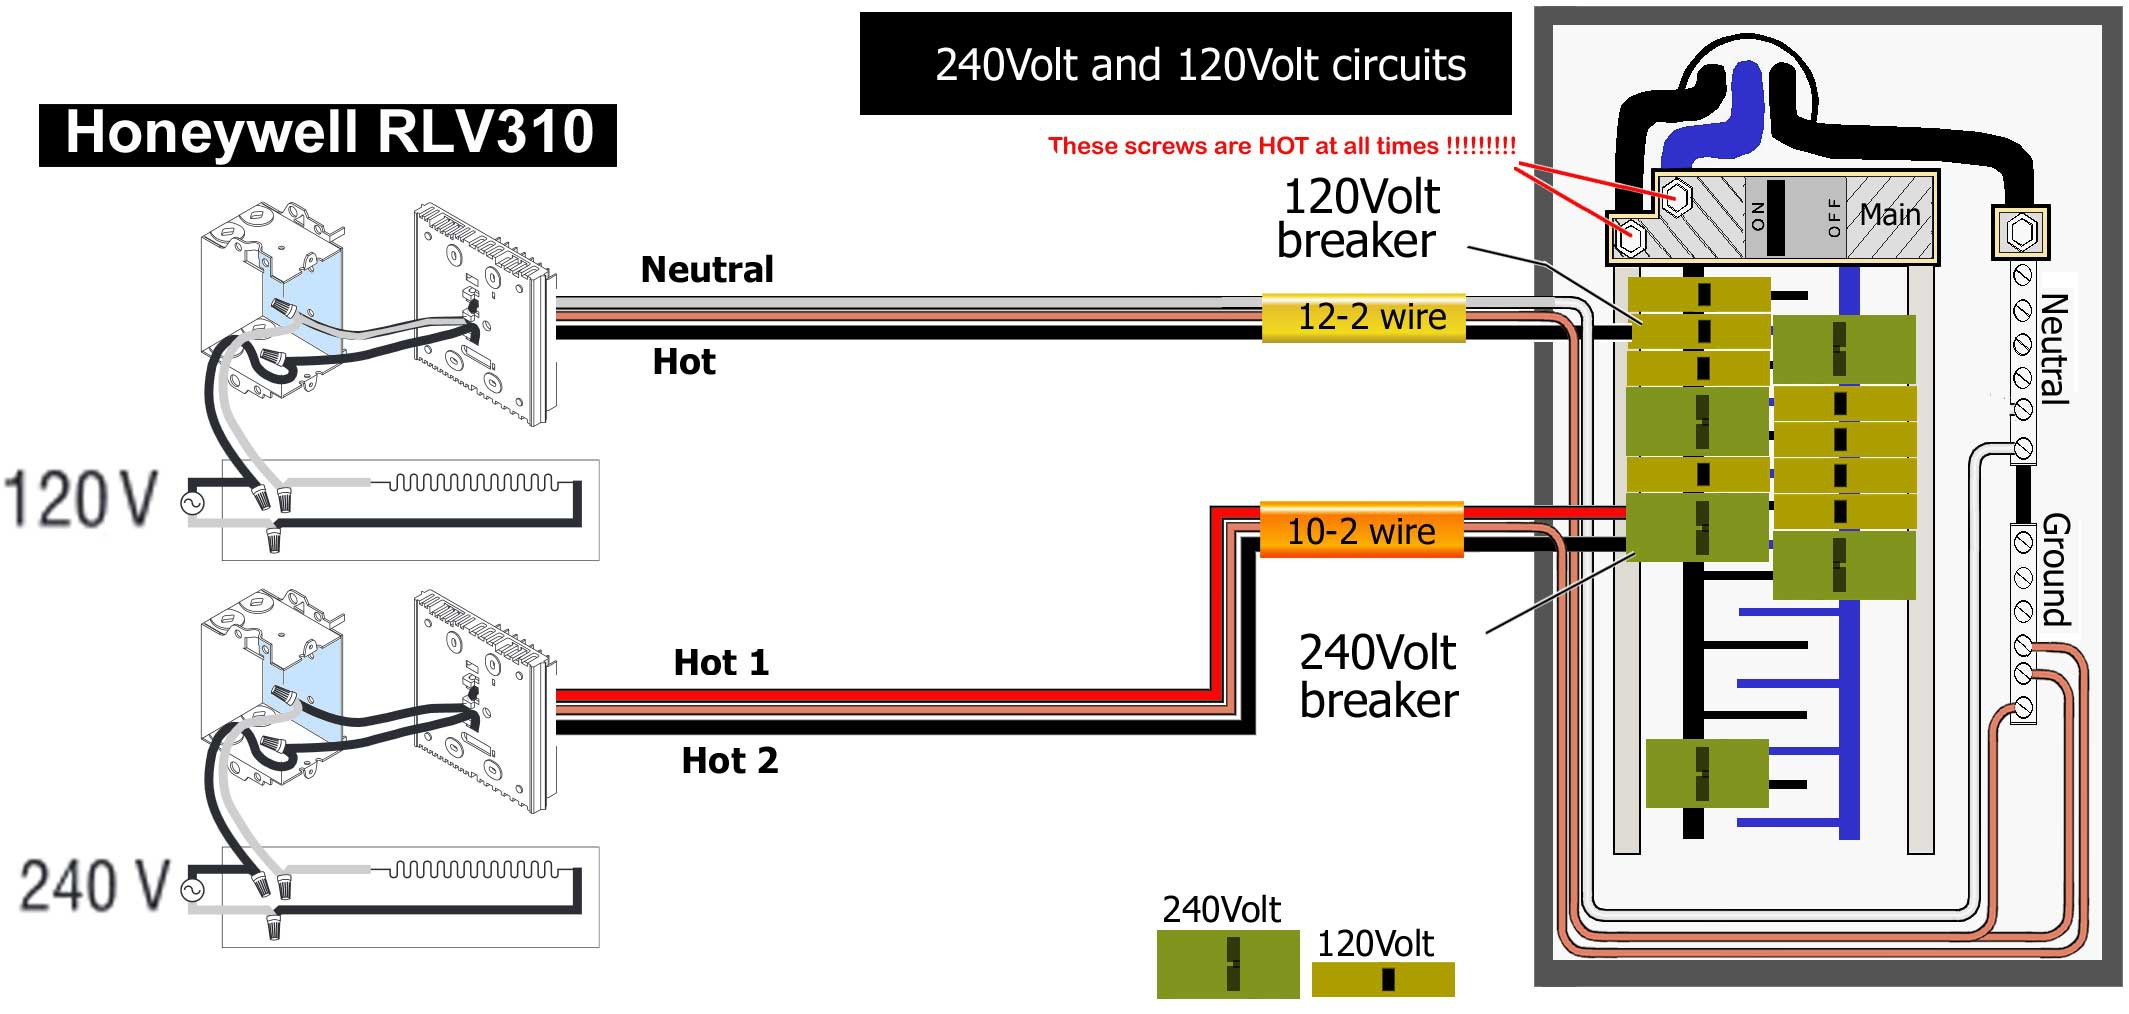 Double Pole Wiring Diagram | Msyc Switch Wiring Diagram - Double Pole Thermostat Wiring Diagram